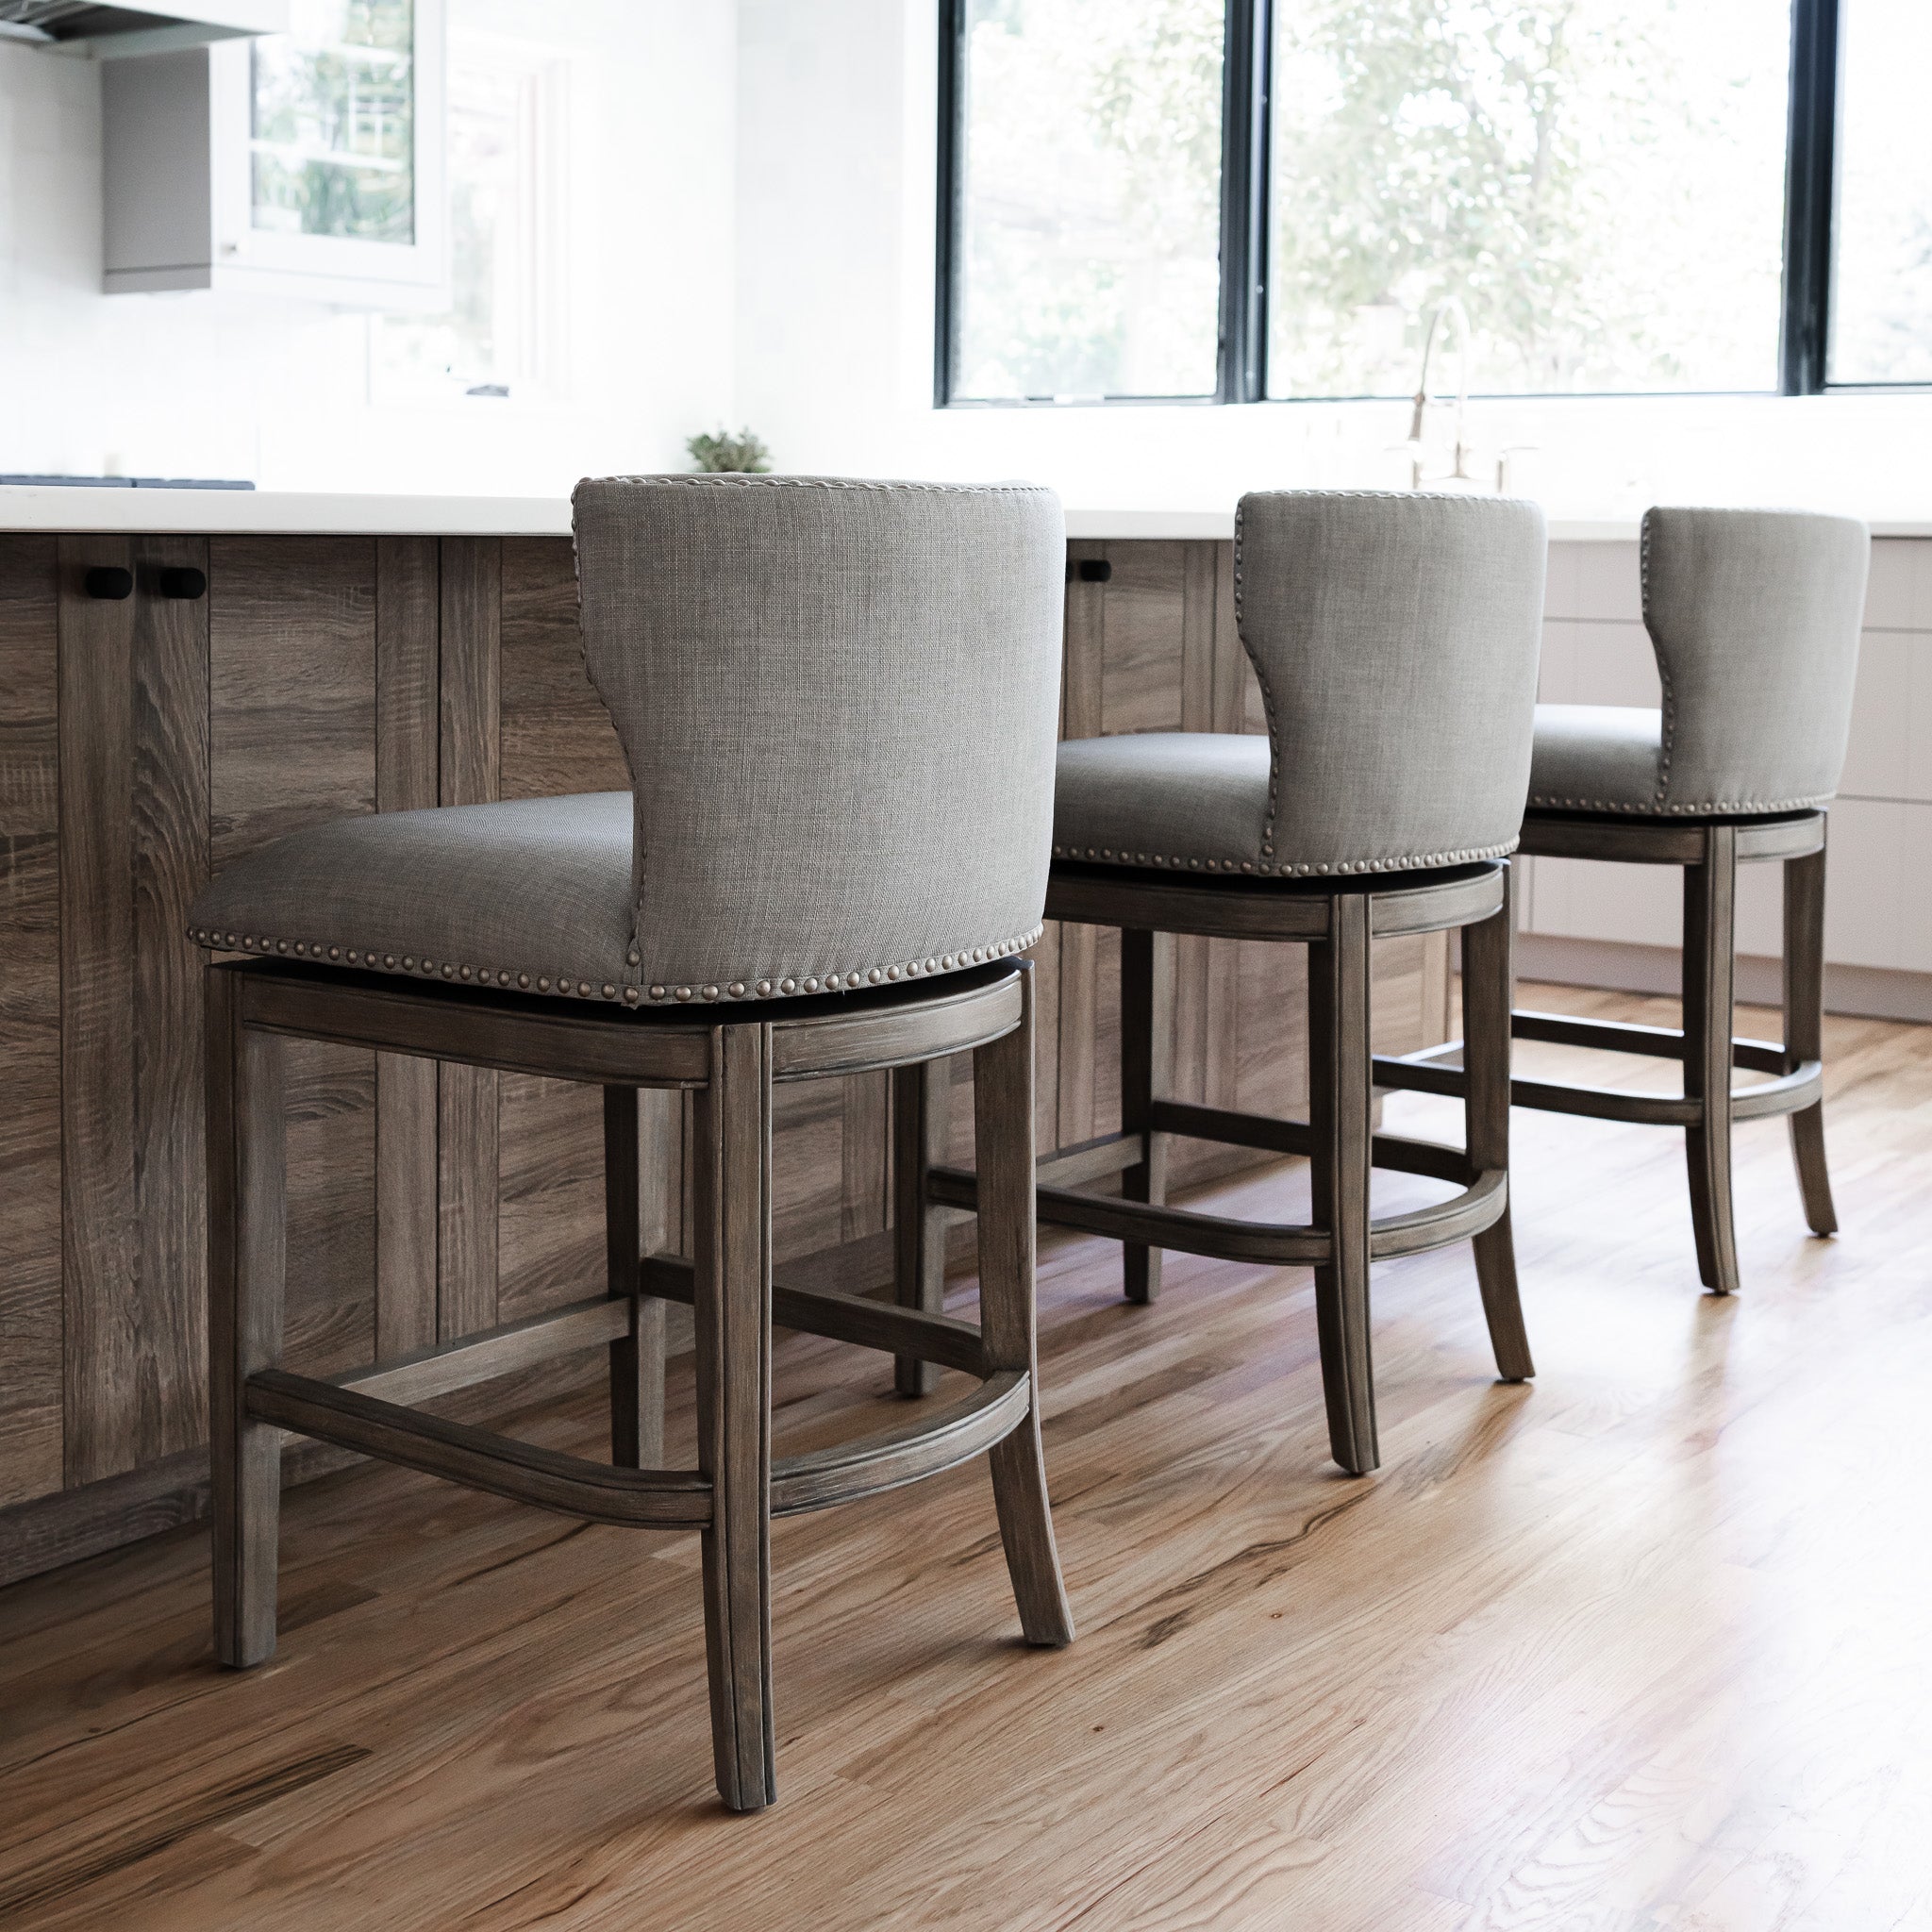 Hugo Bar Stool in Reclaimed Oak Finish with Ash Grey Fabric Upholstery in Stools by Maven Lane